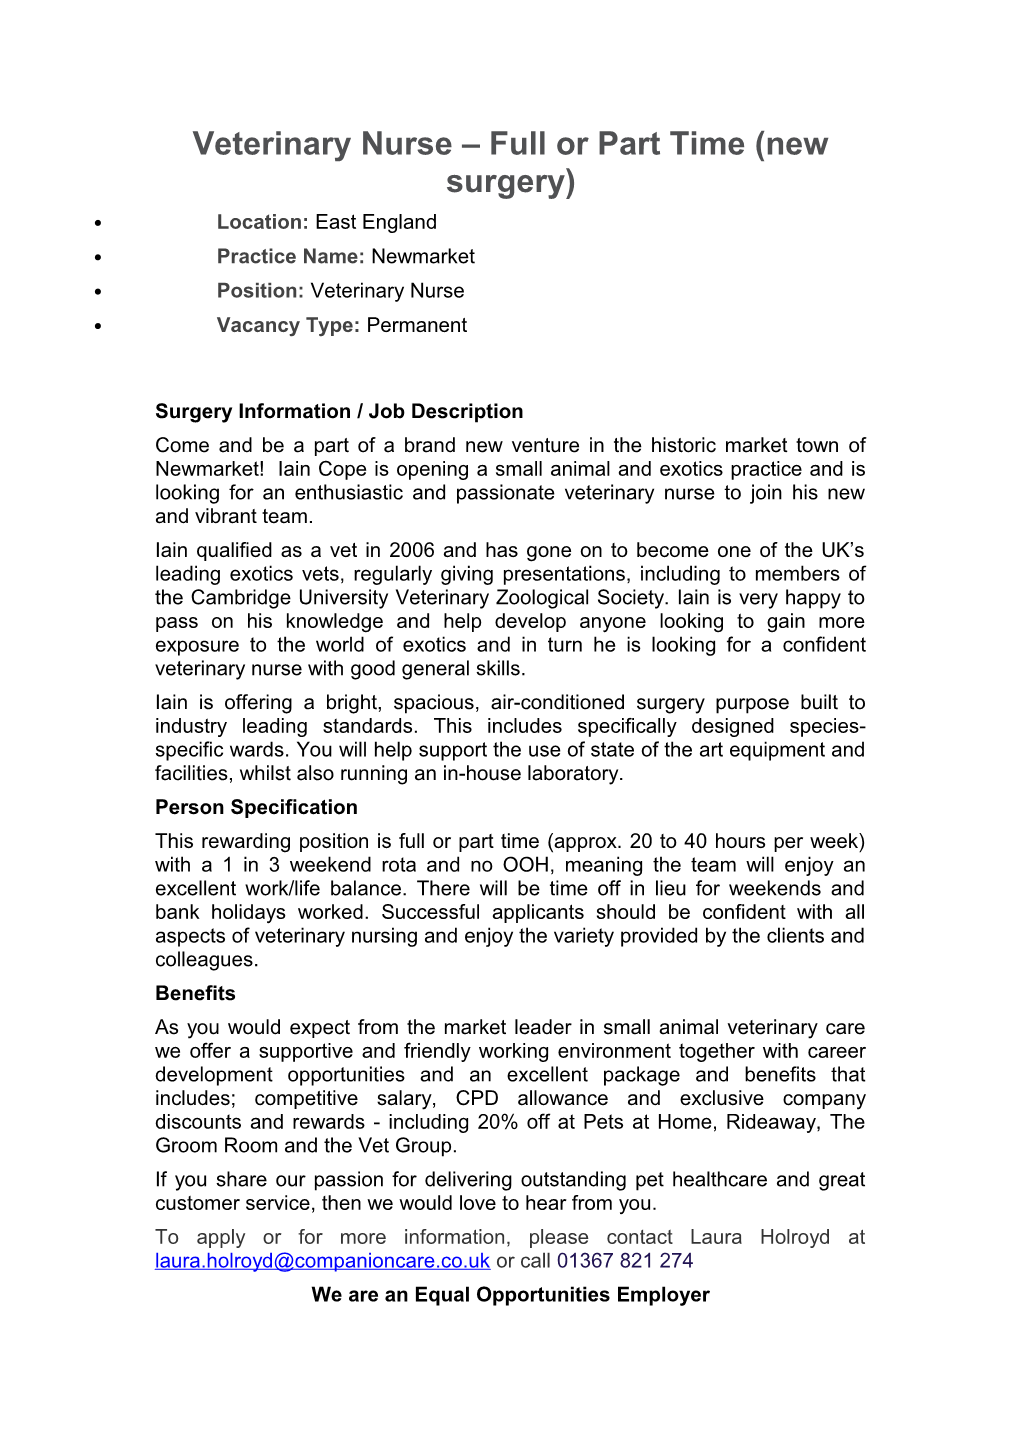 Veterinary Nurse Full Or Part Time (New Surgery)